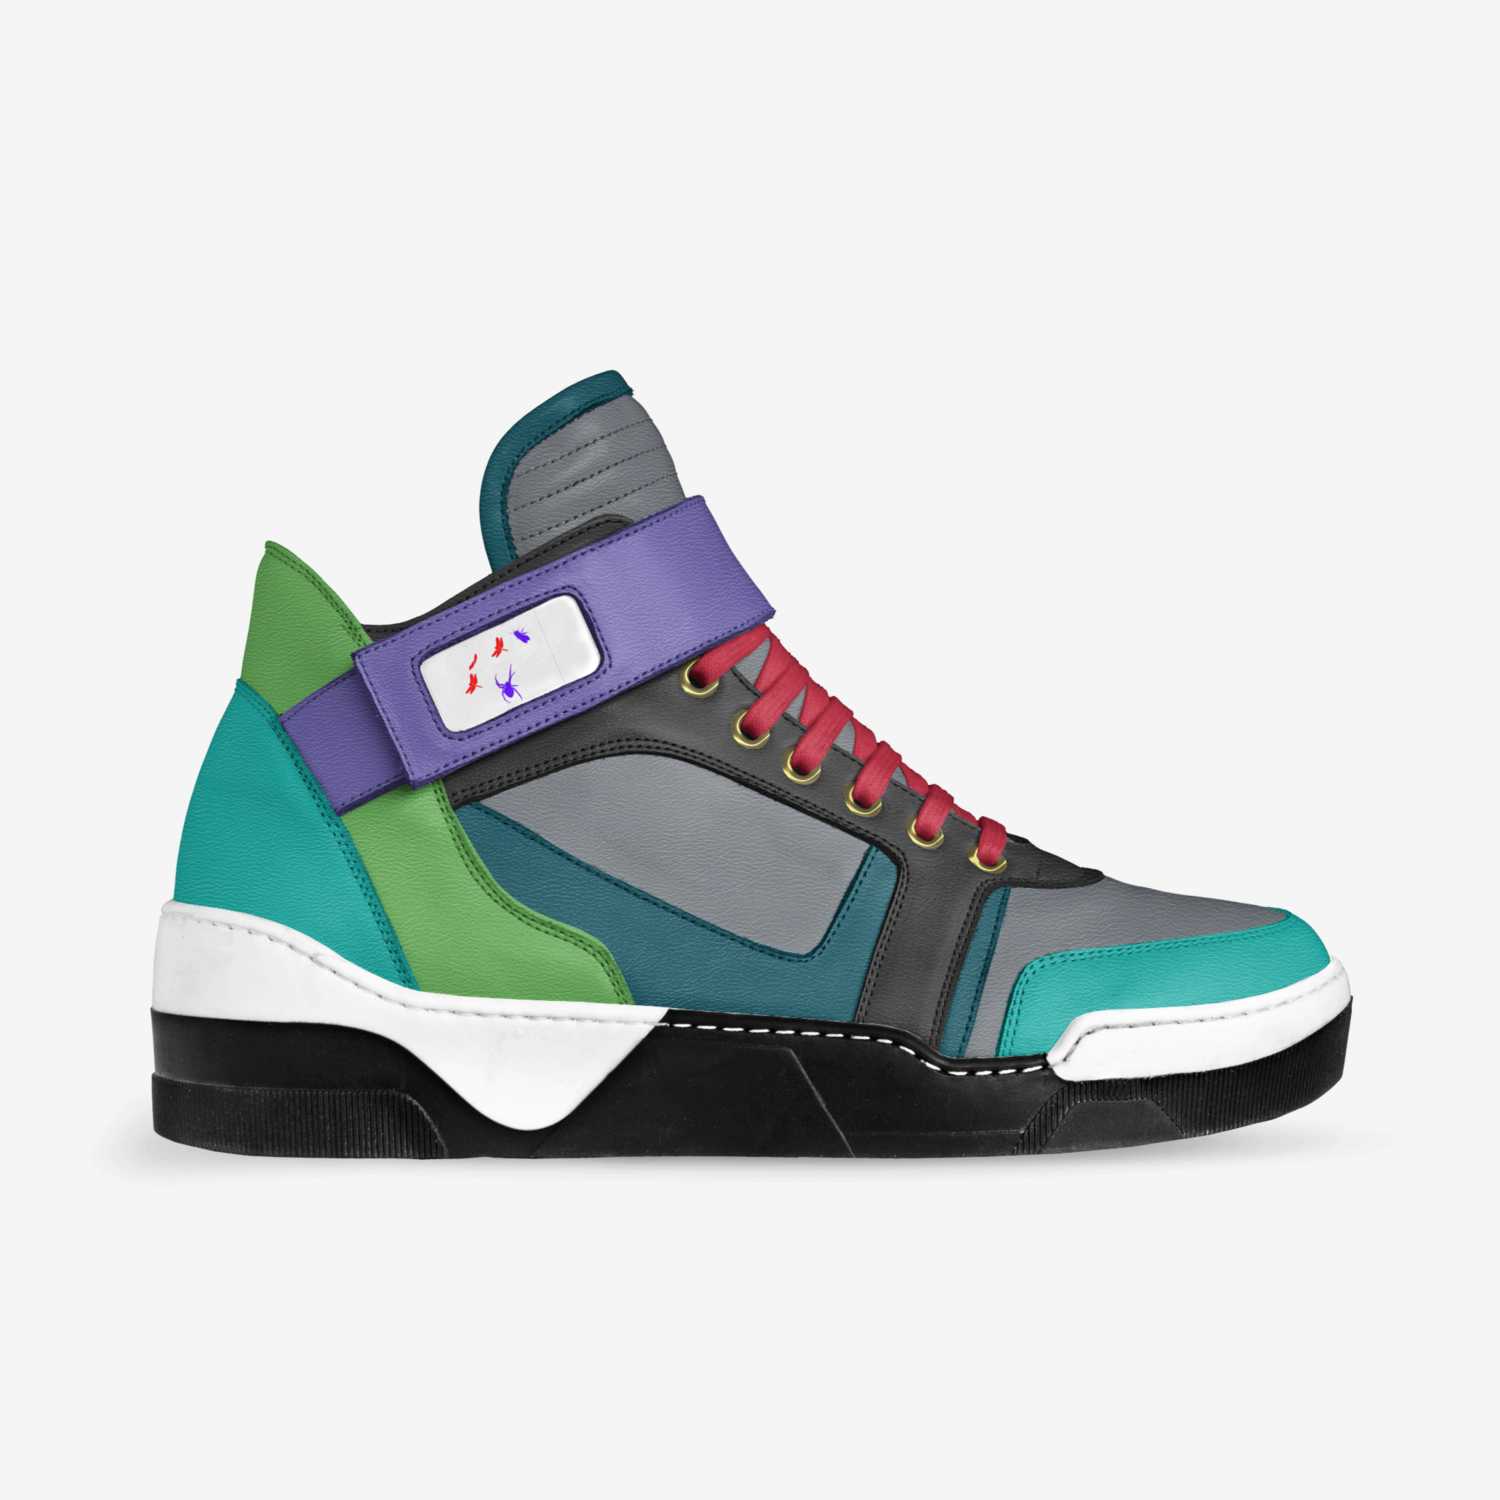 FORTNITE | A Custom Shoe concept by Tyler